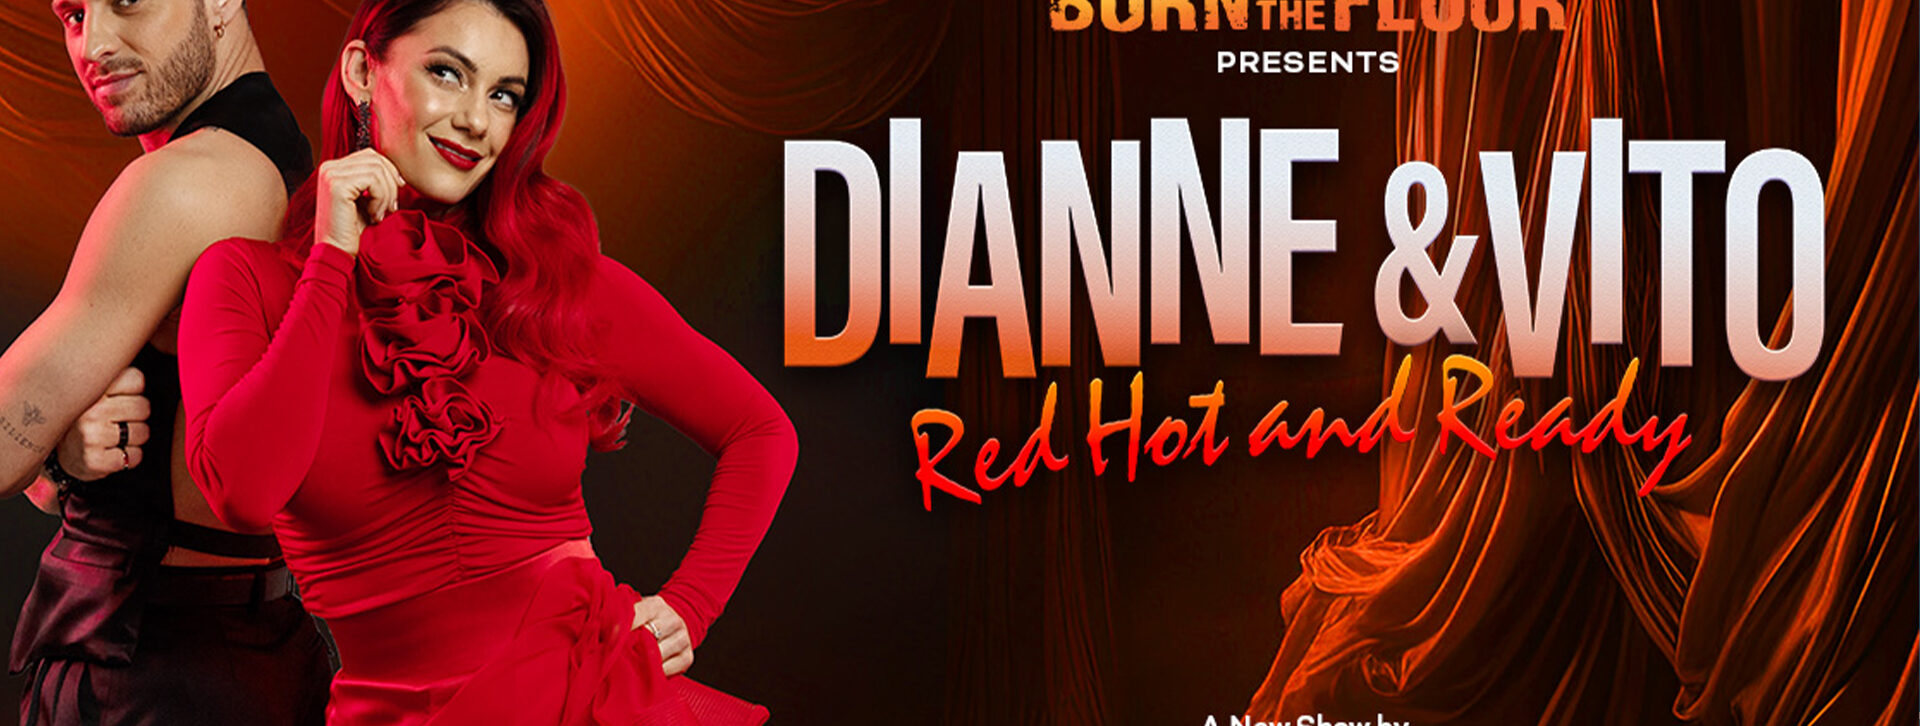 Burn the Floor – Dianne &#038; Vito Red Hot &#038; Ready